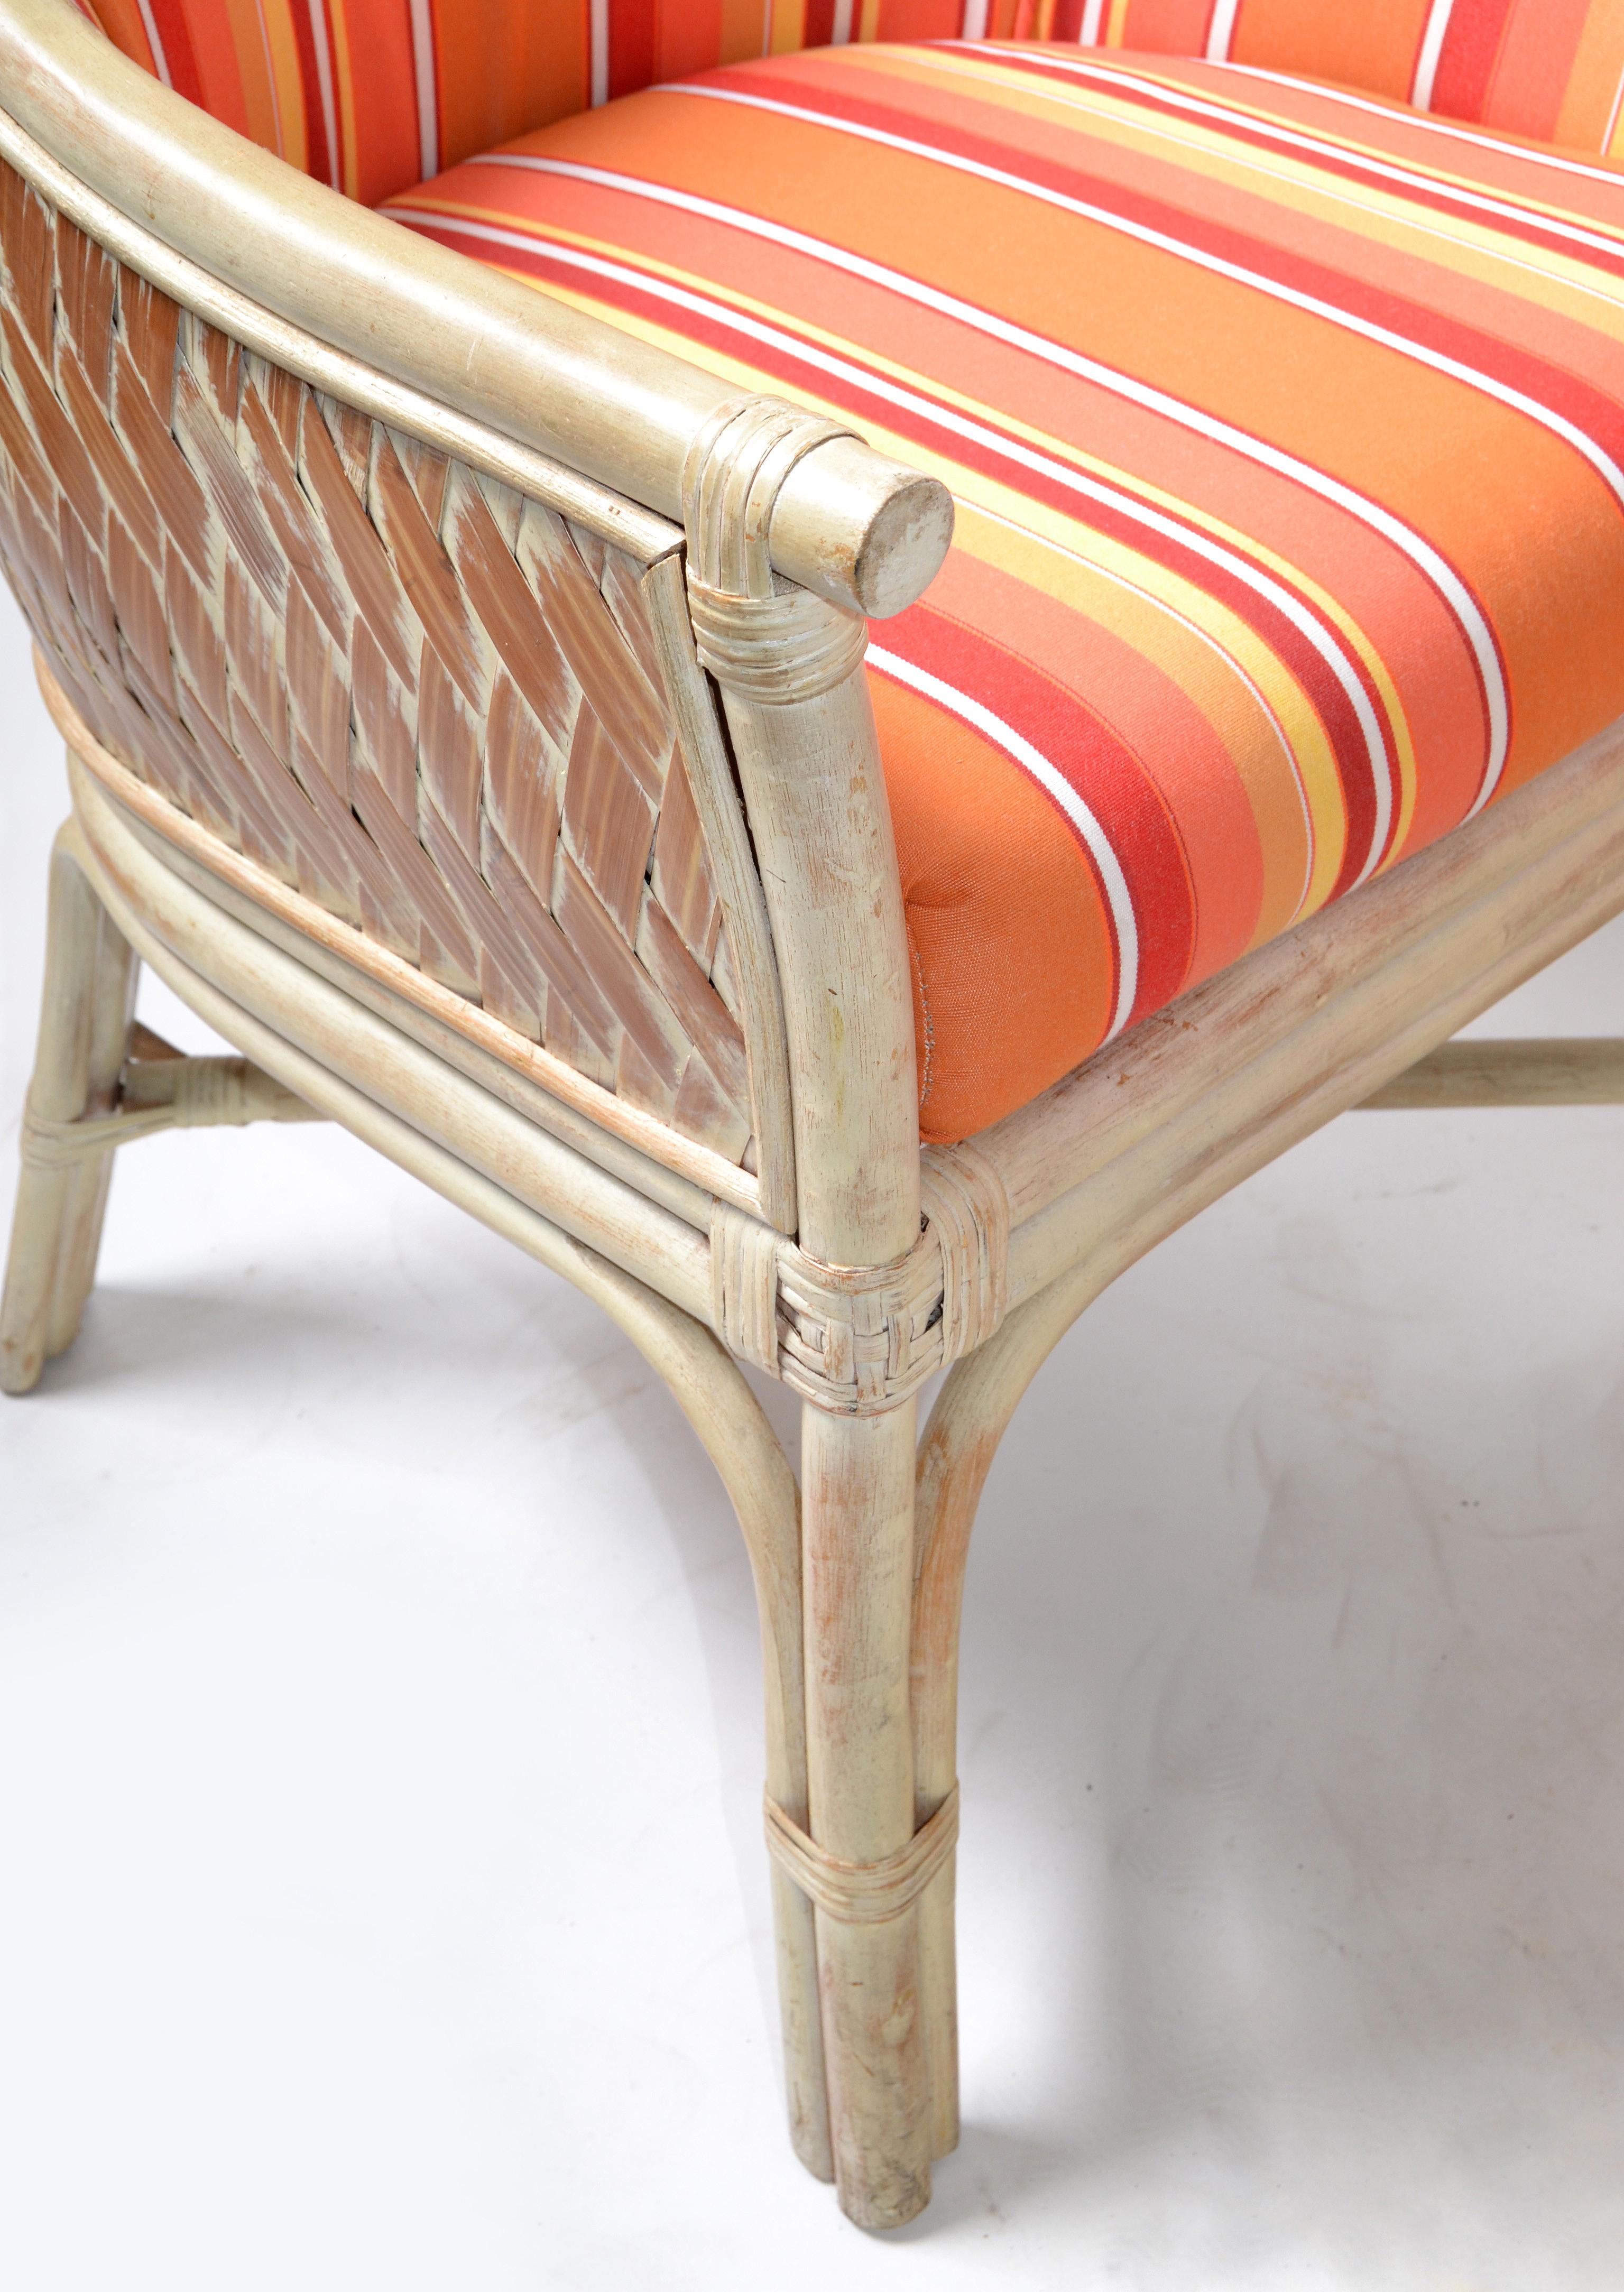 Pair, Mid-Century Modern Bamboo & Cane Armchair Orange Striped Upholstery, 1970 For Sale 1